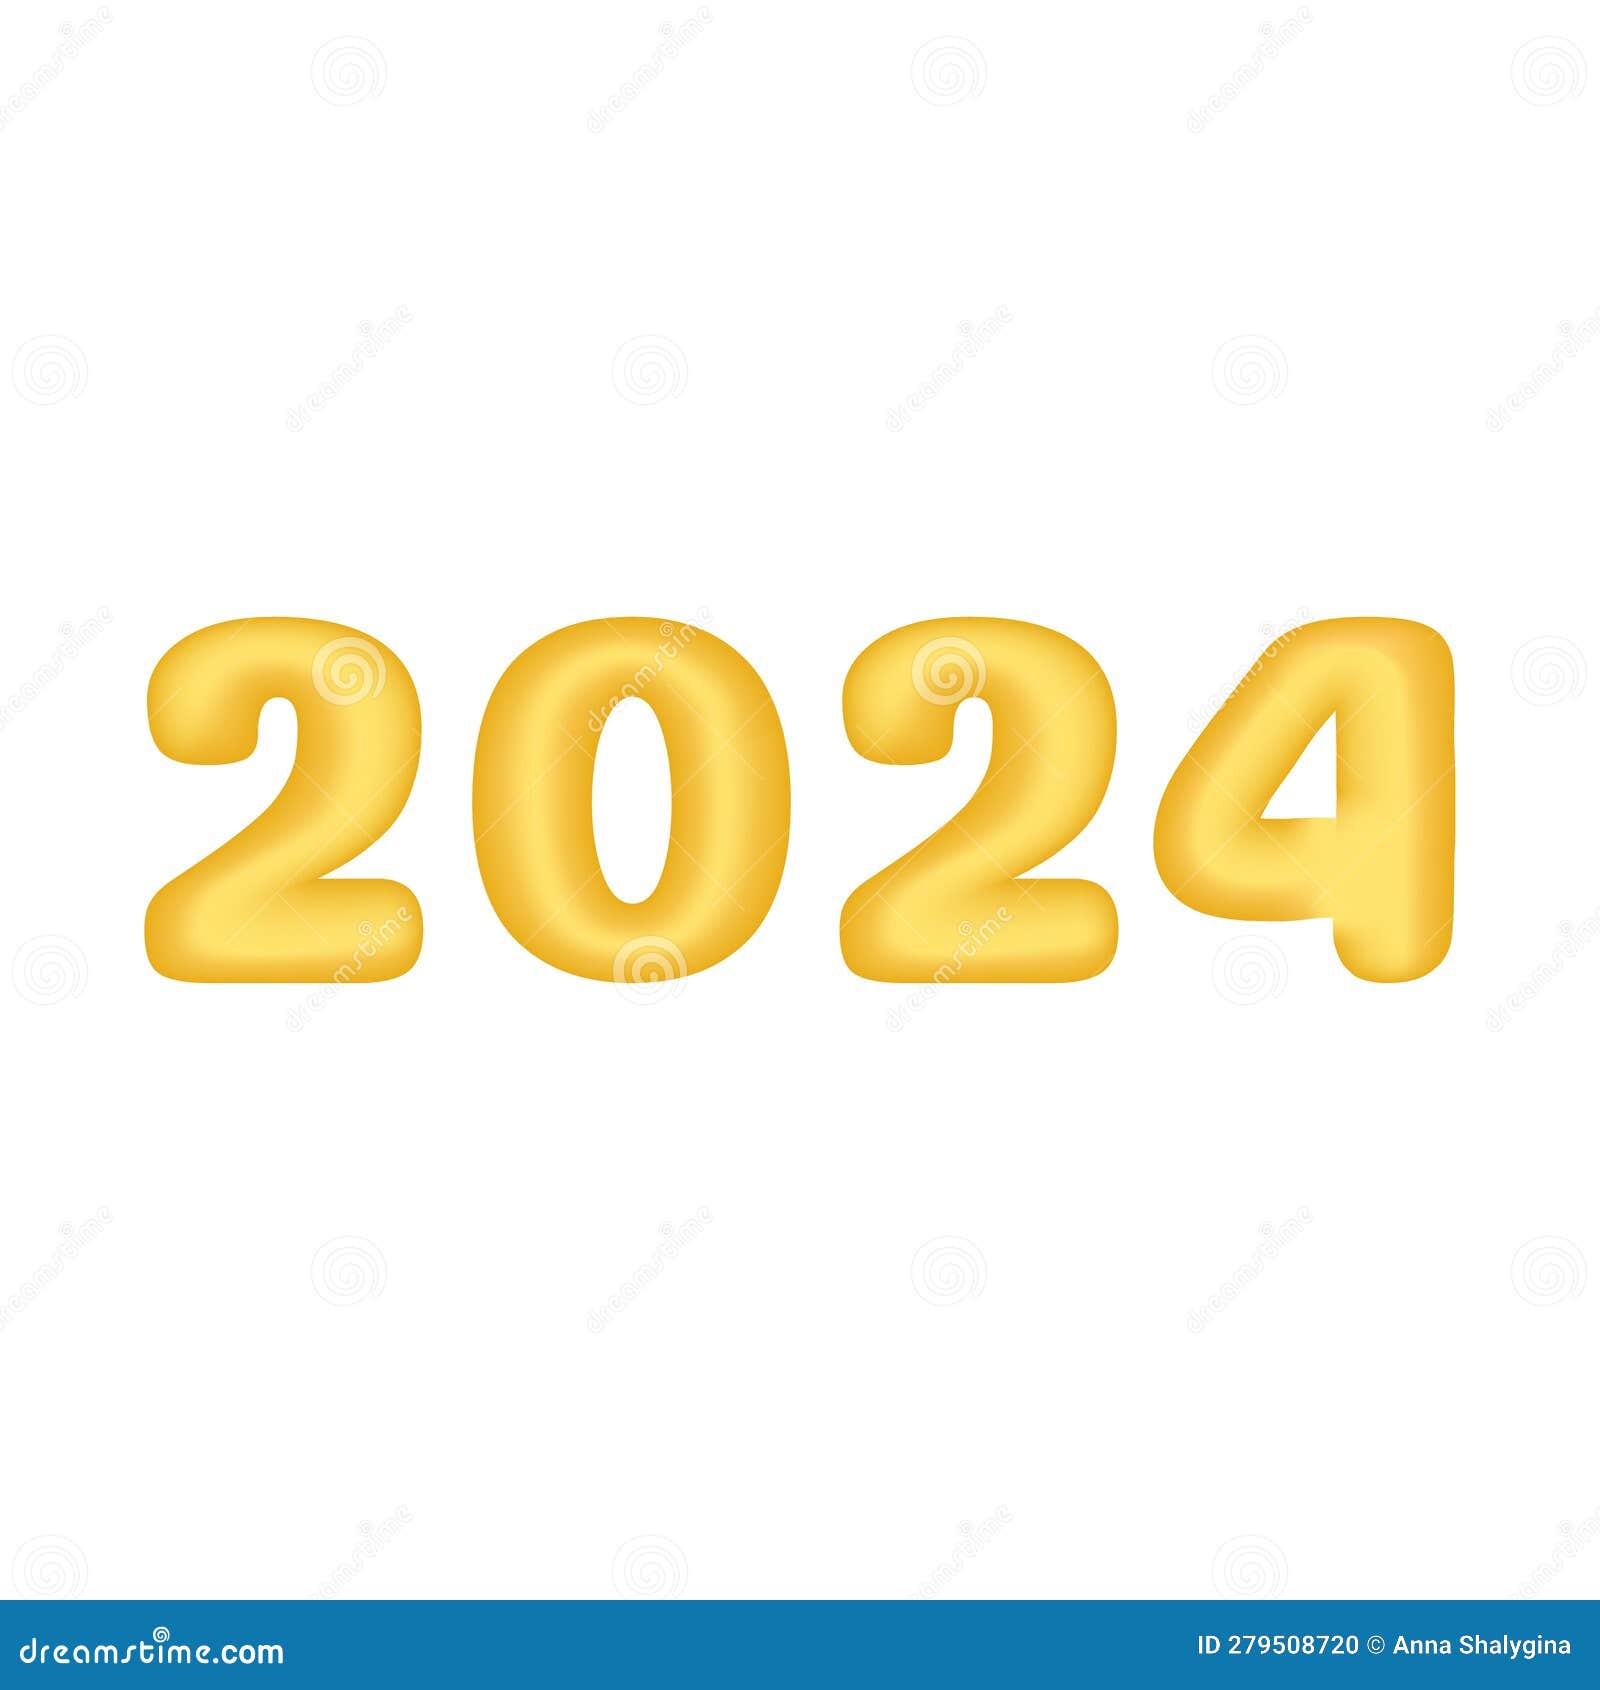 2024 3D Digits Vector. Golden Number 2024 Isolated on White Background